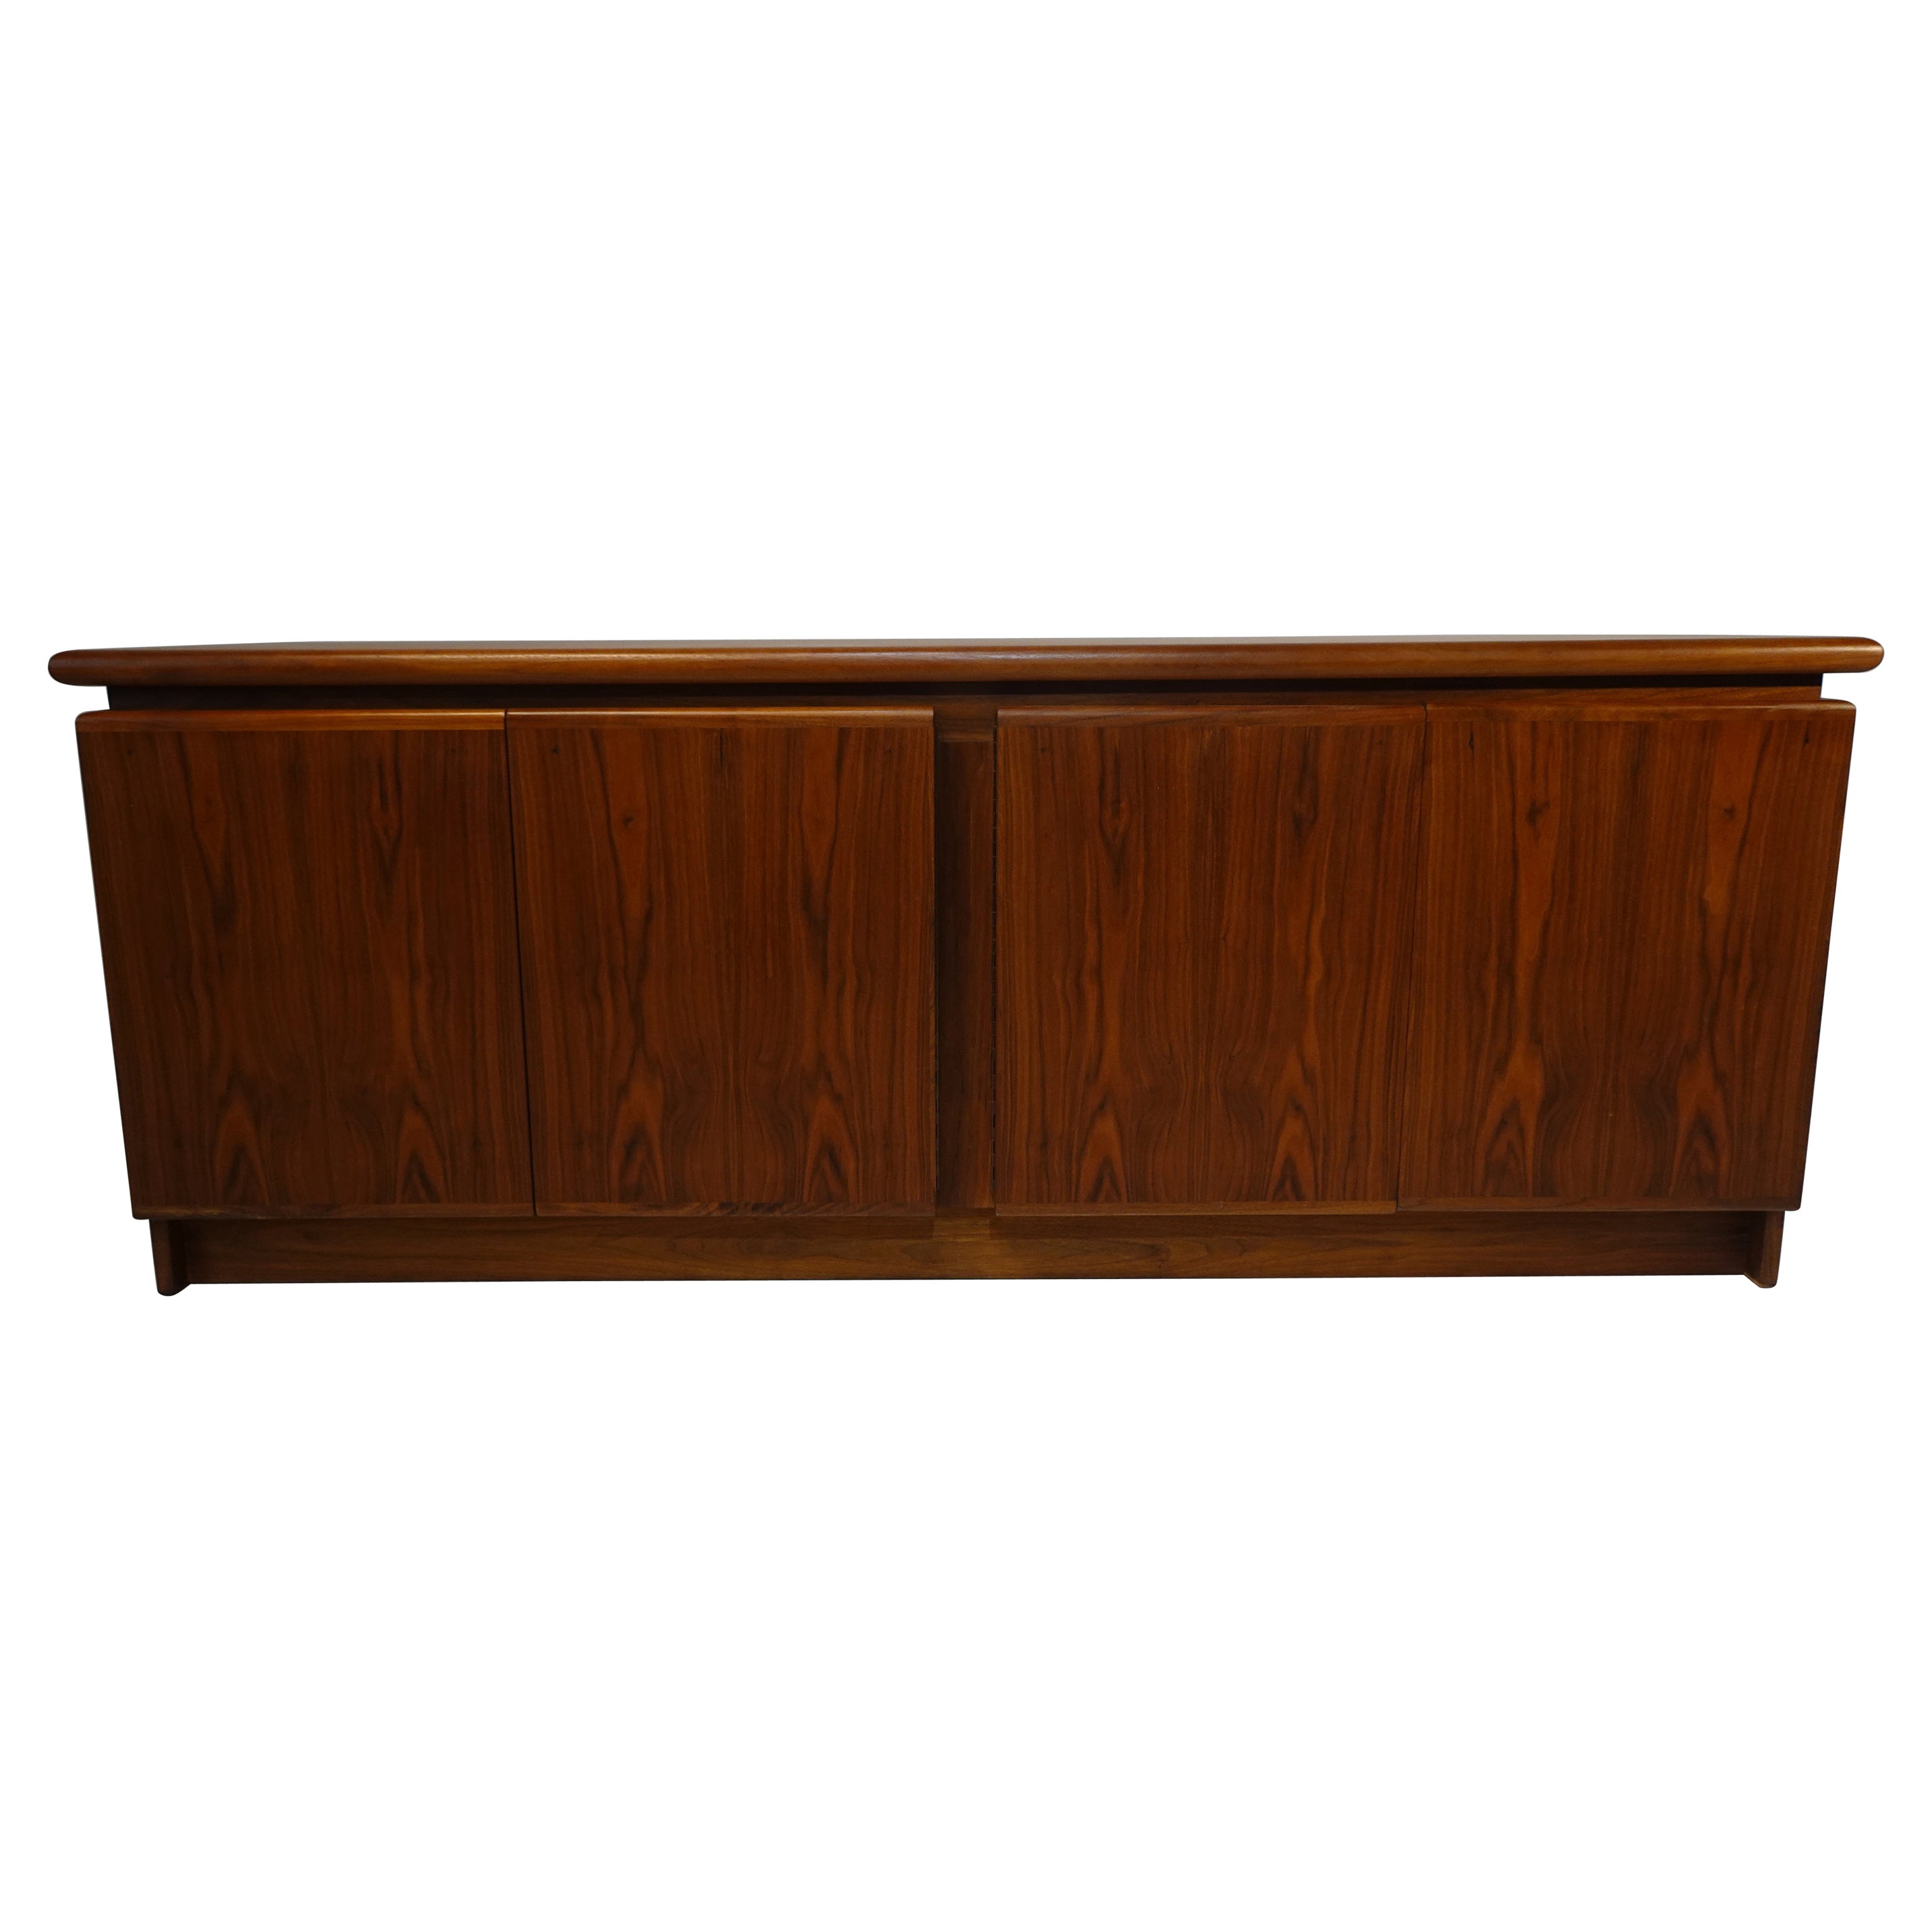 Danish Walnut Credenza / Sideboard in the Style of Poul Hundevad